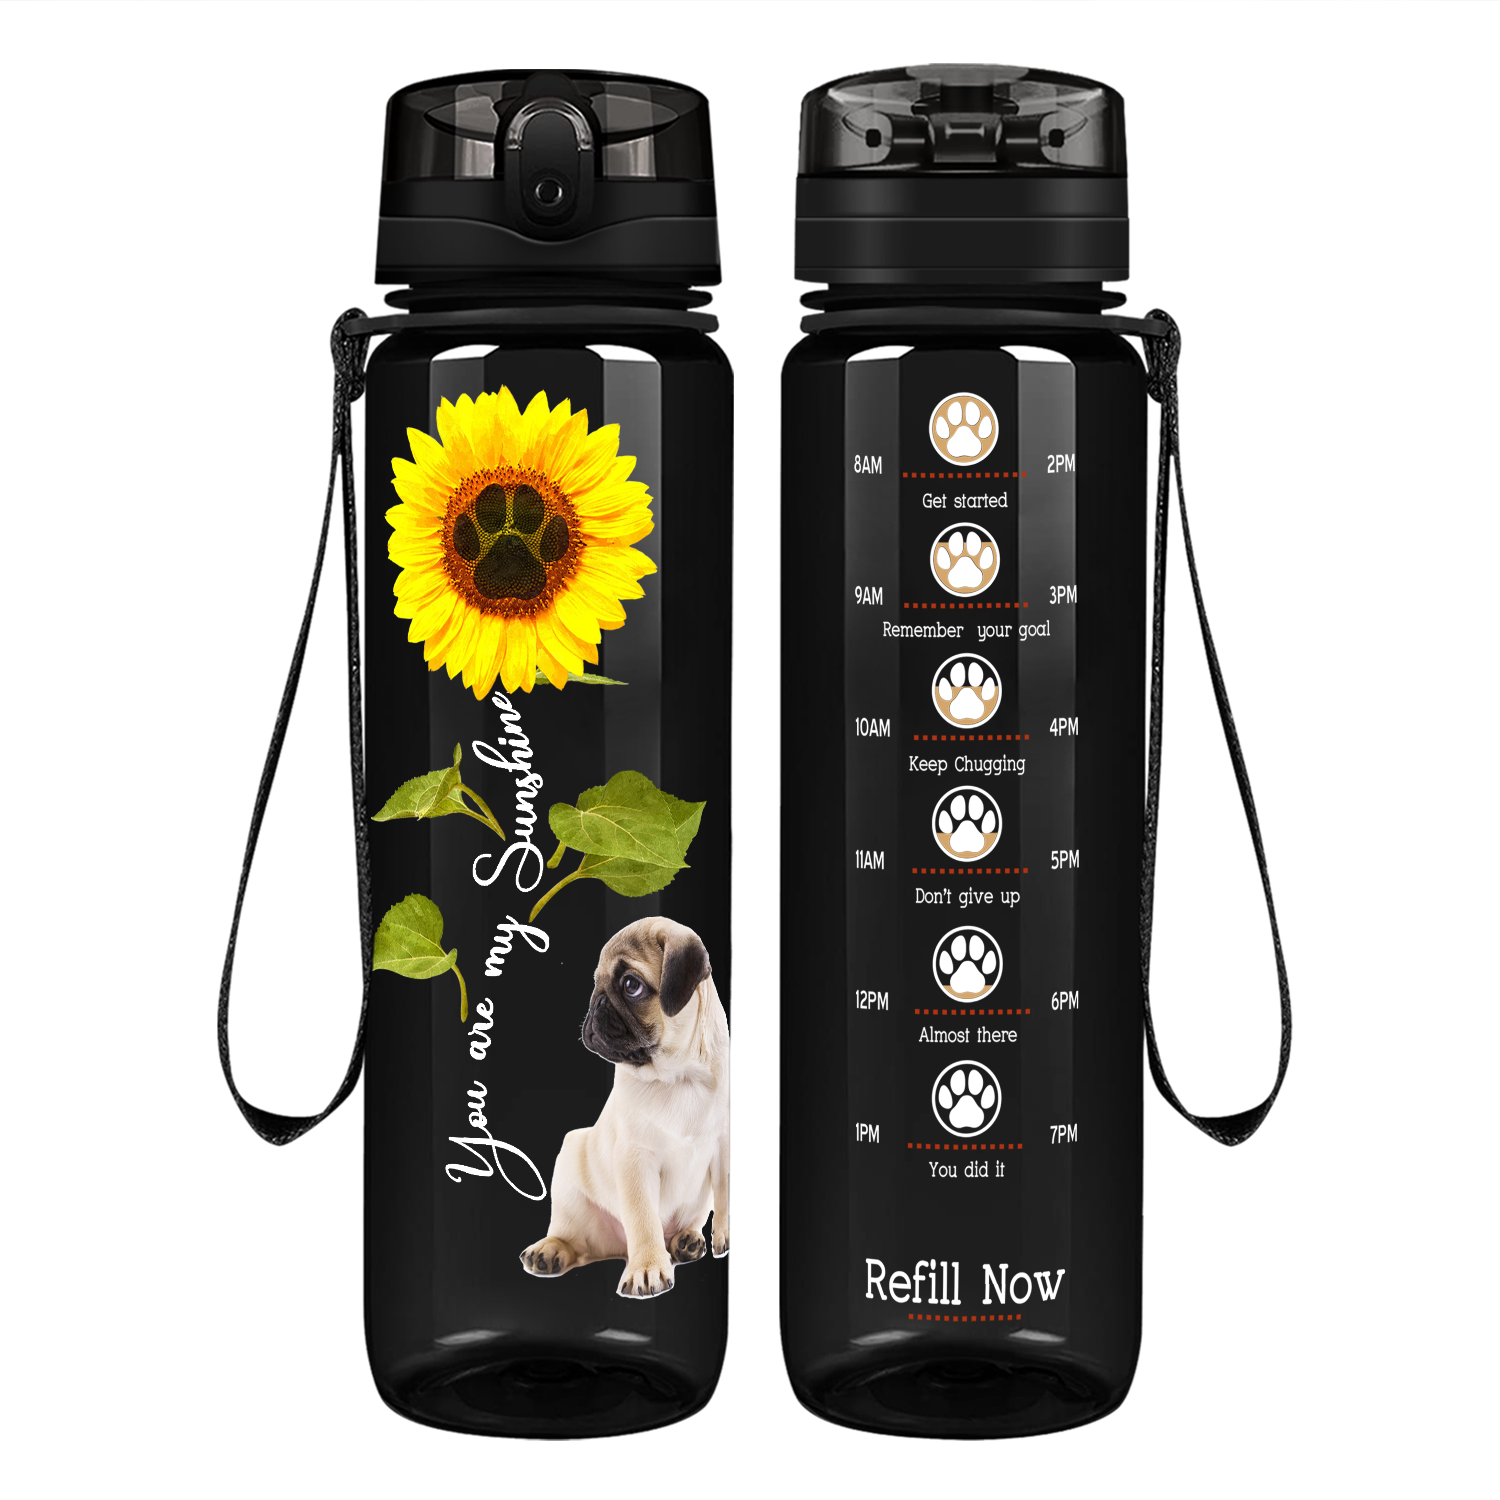 Little Pug You are my Sunshine on 32 oz Motivational Tracking Water Bottle